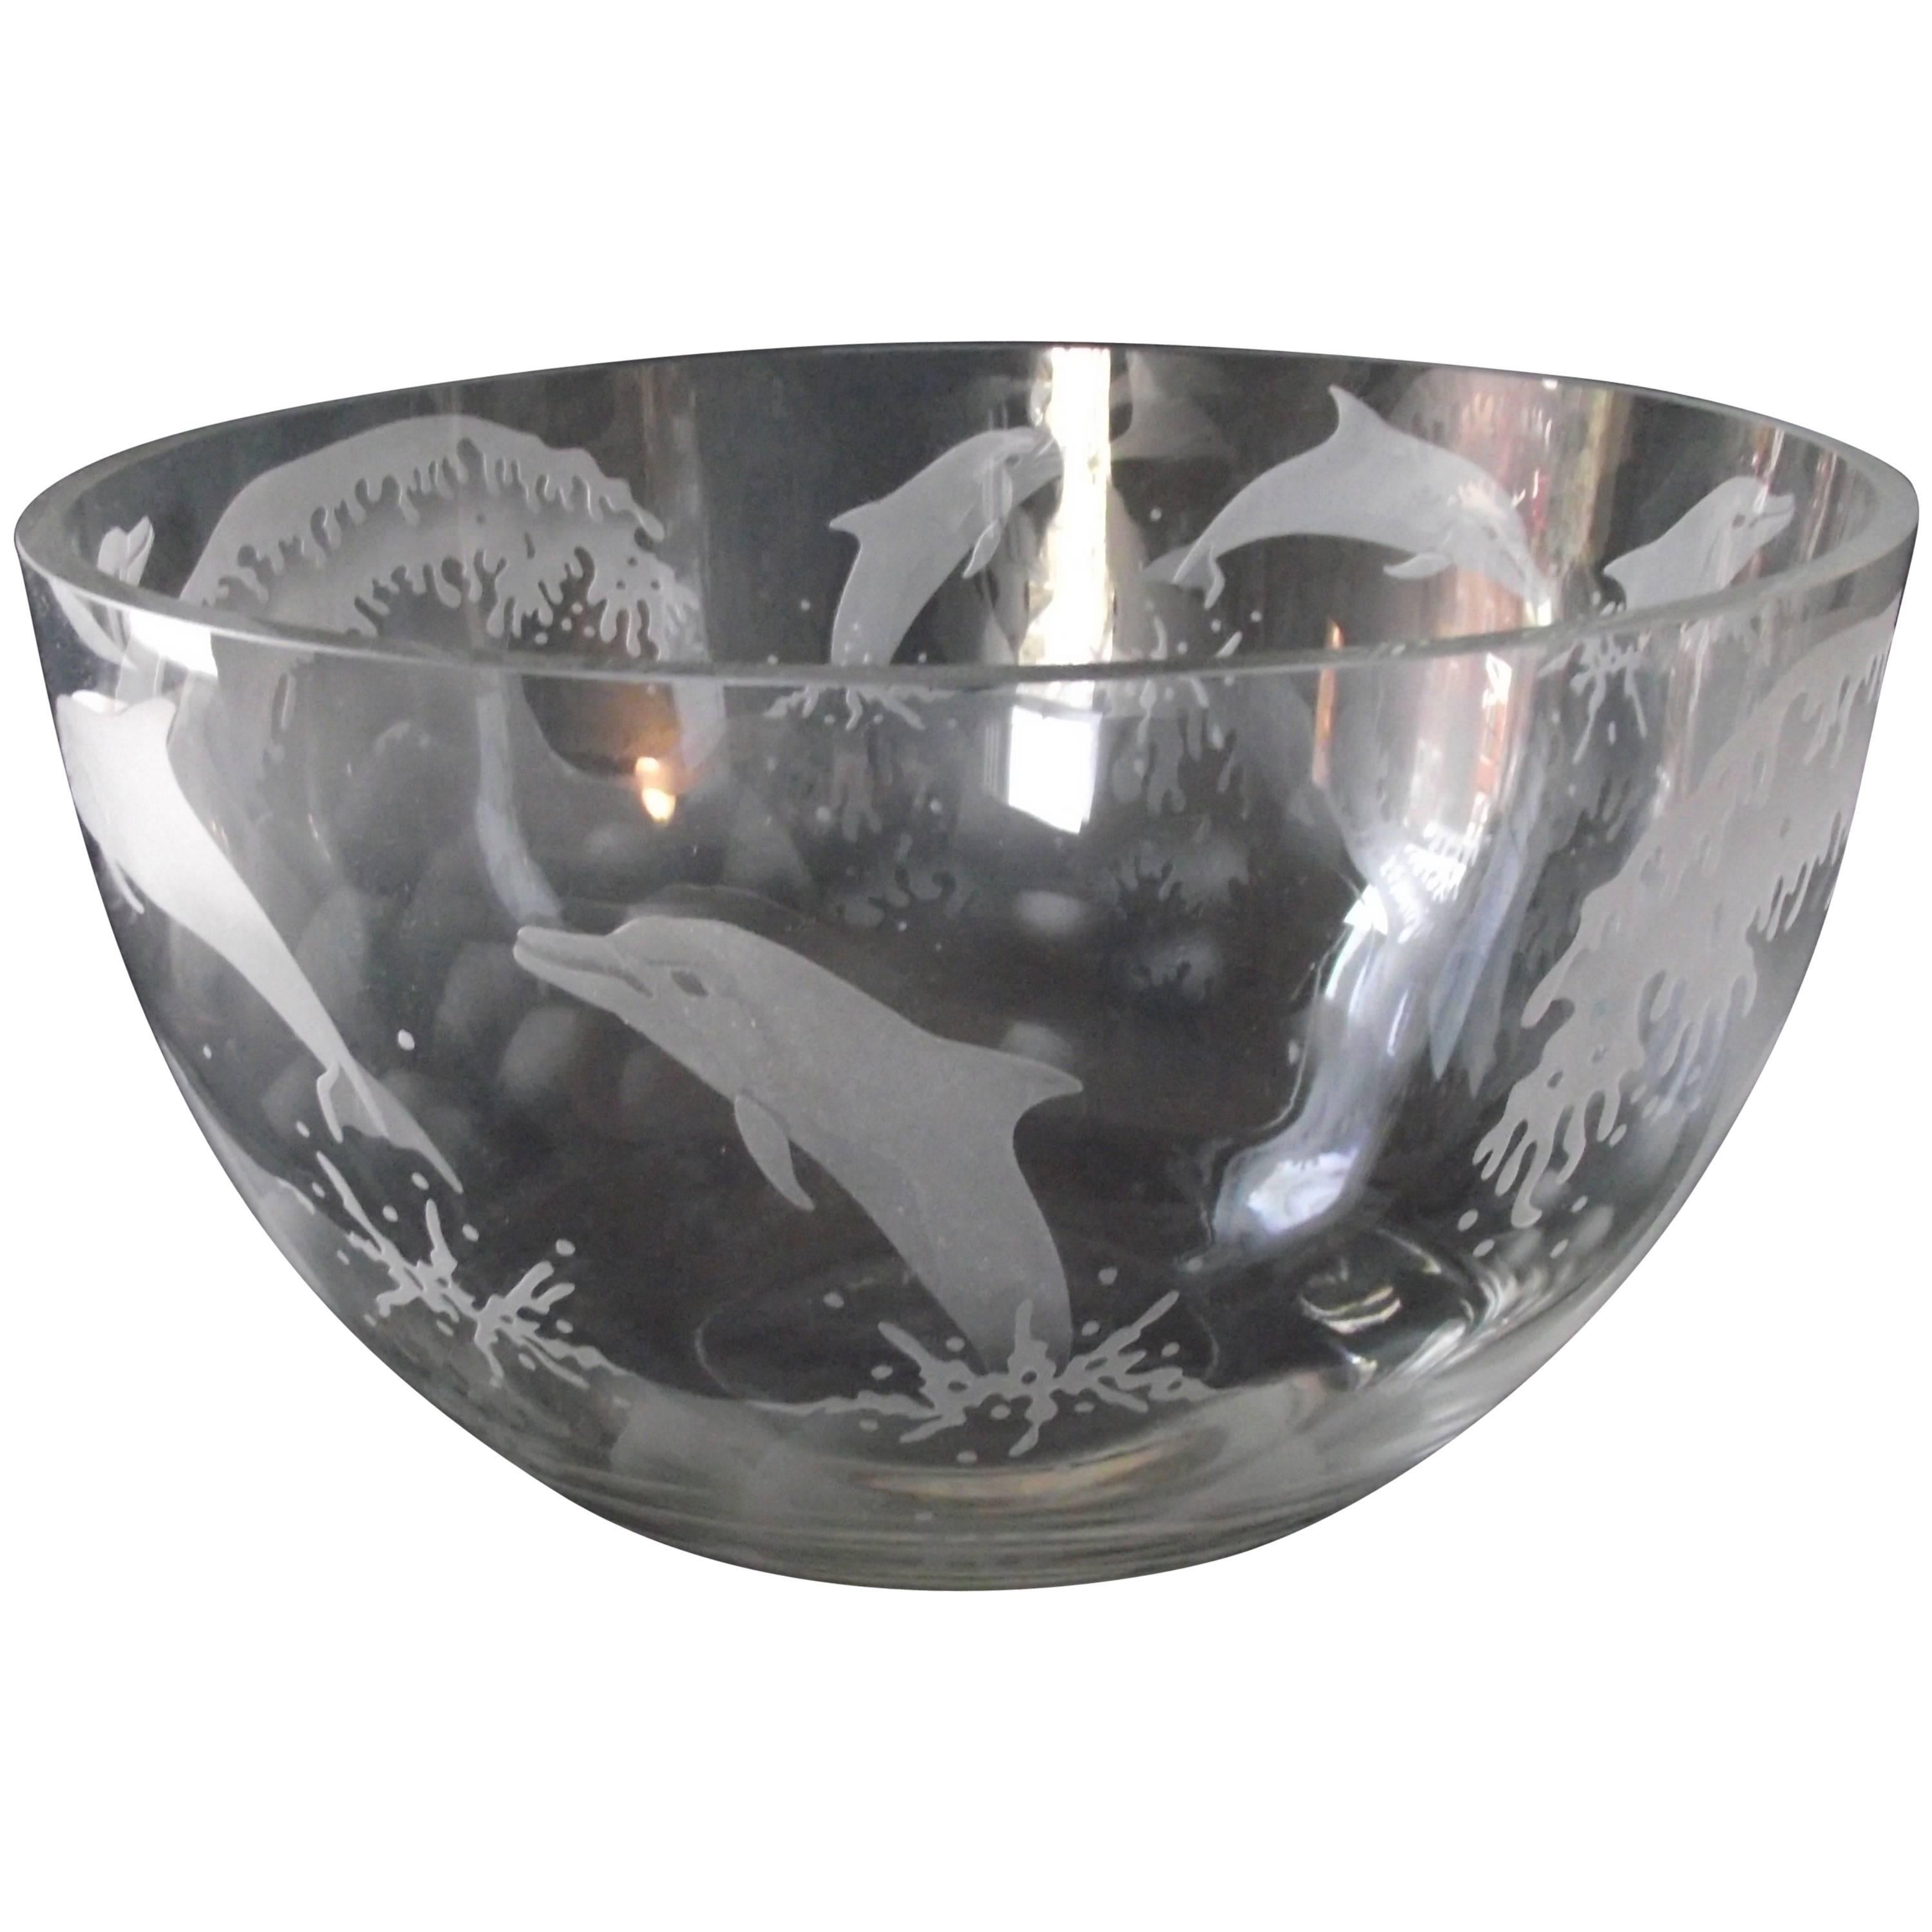 A truly unique piece, this large, heavy etched glass bowl is decorated with a school of Dauphins frolicking in the Ocean.

It is in extremely good shape no chips, bubbles or cracks. Very well executed. The bottom of the bowl bears the signature